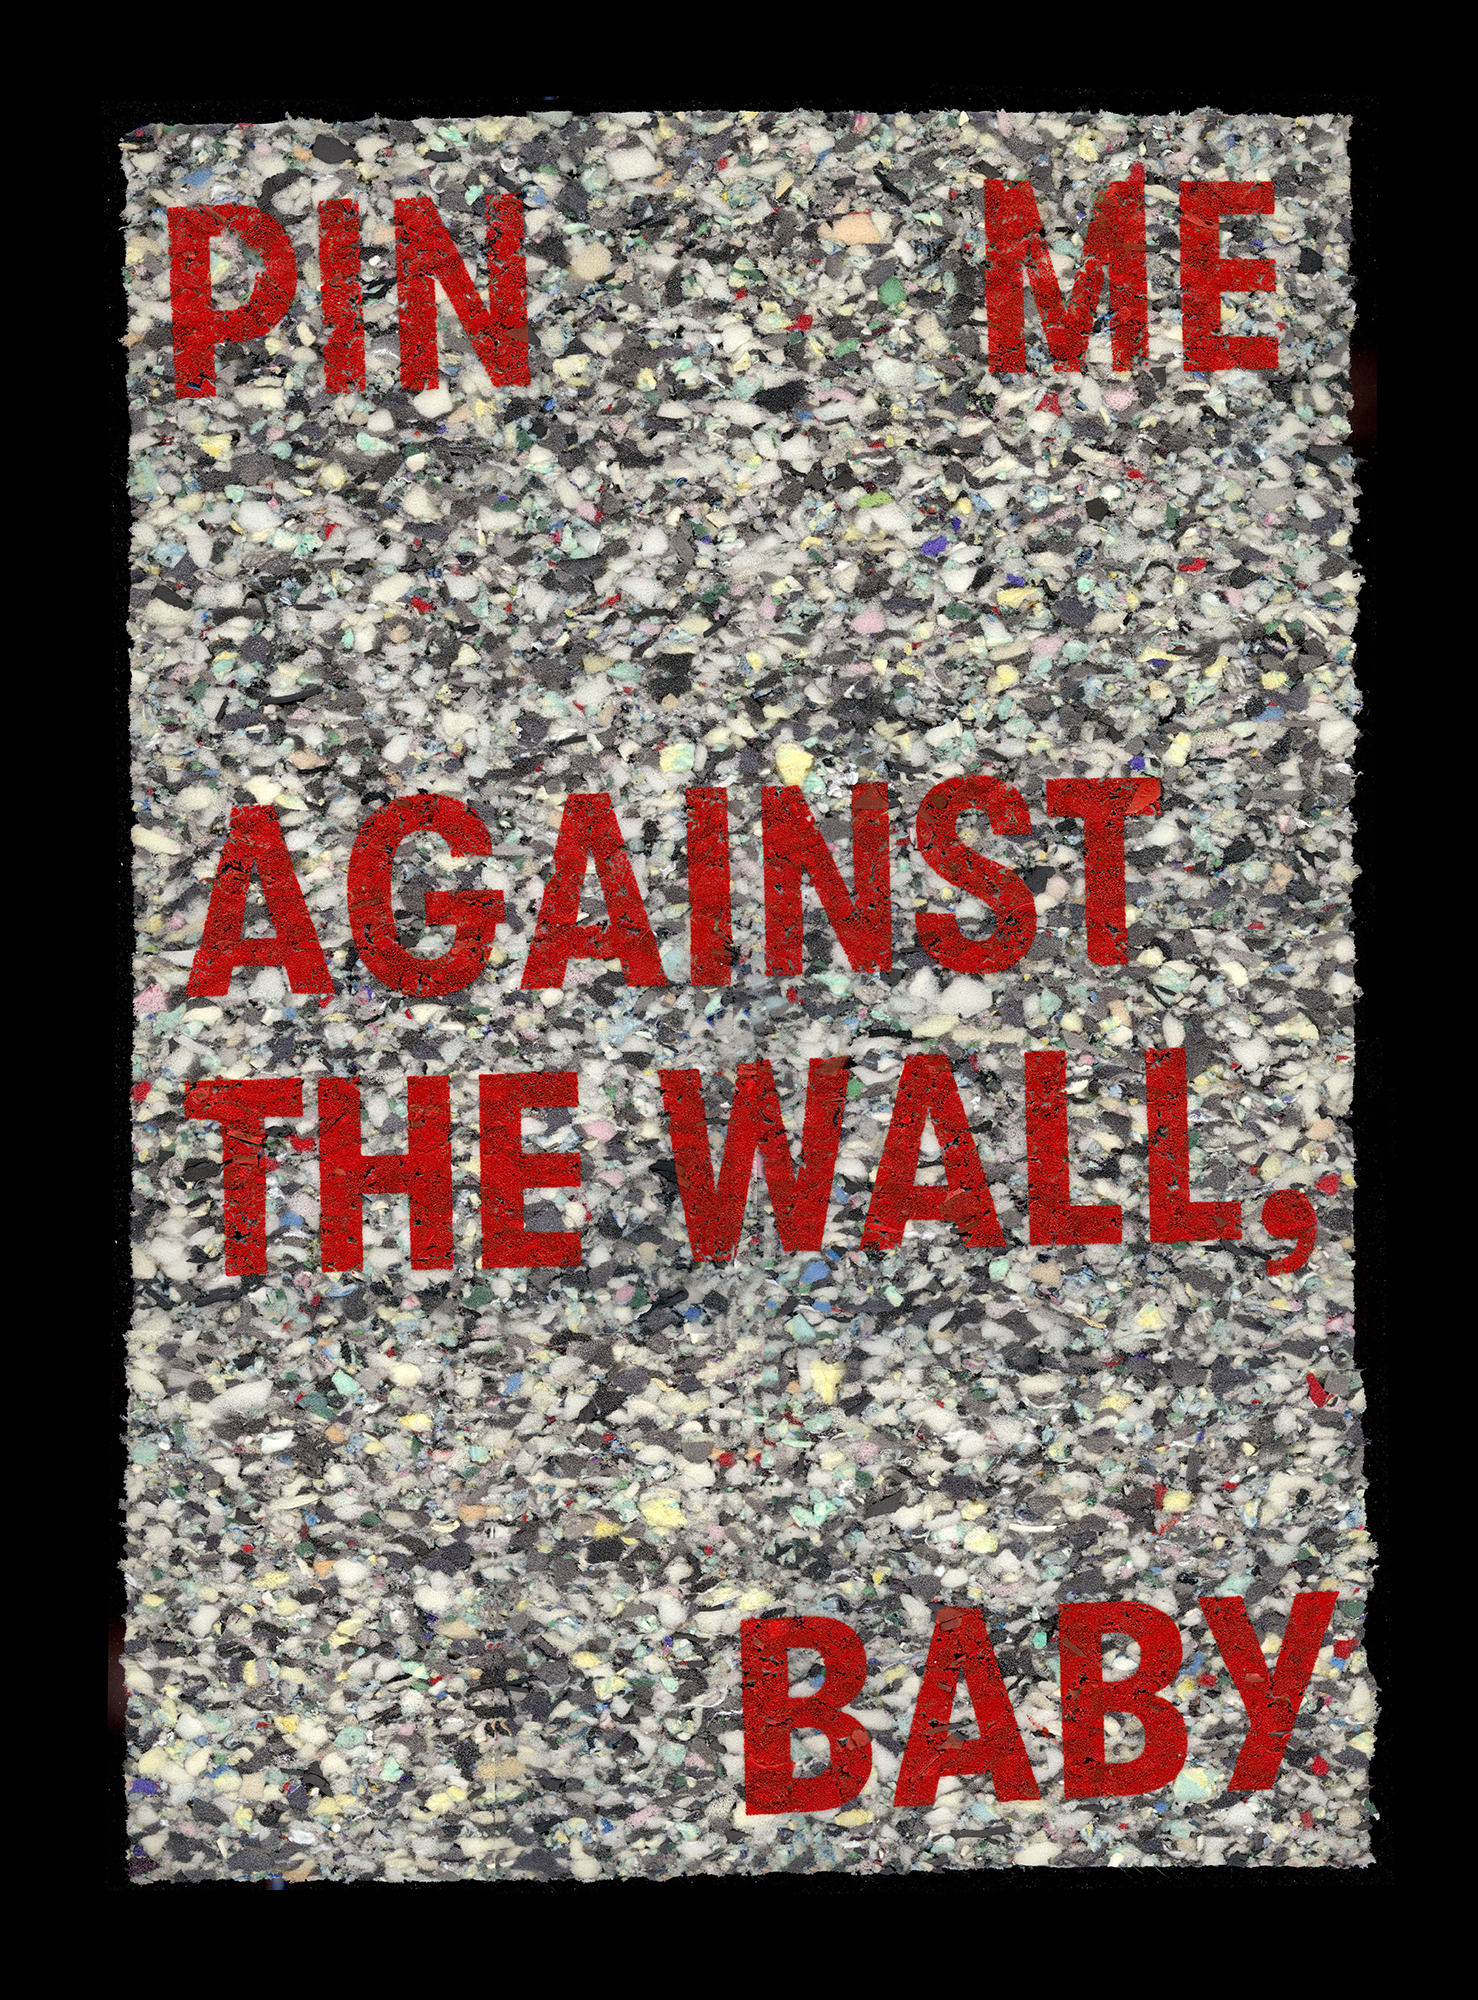 beverly mccord recommends pin me up against the wall pic